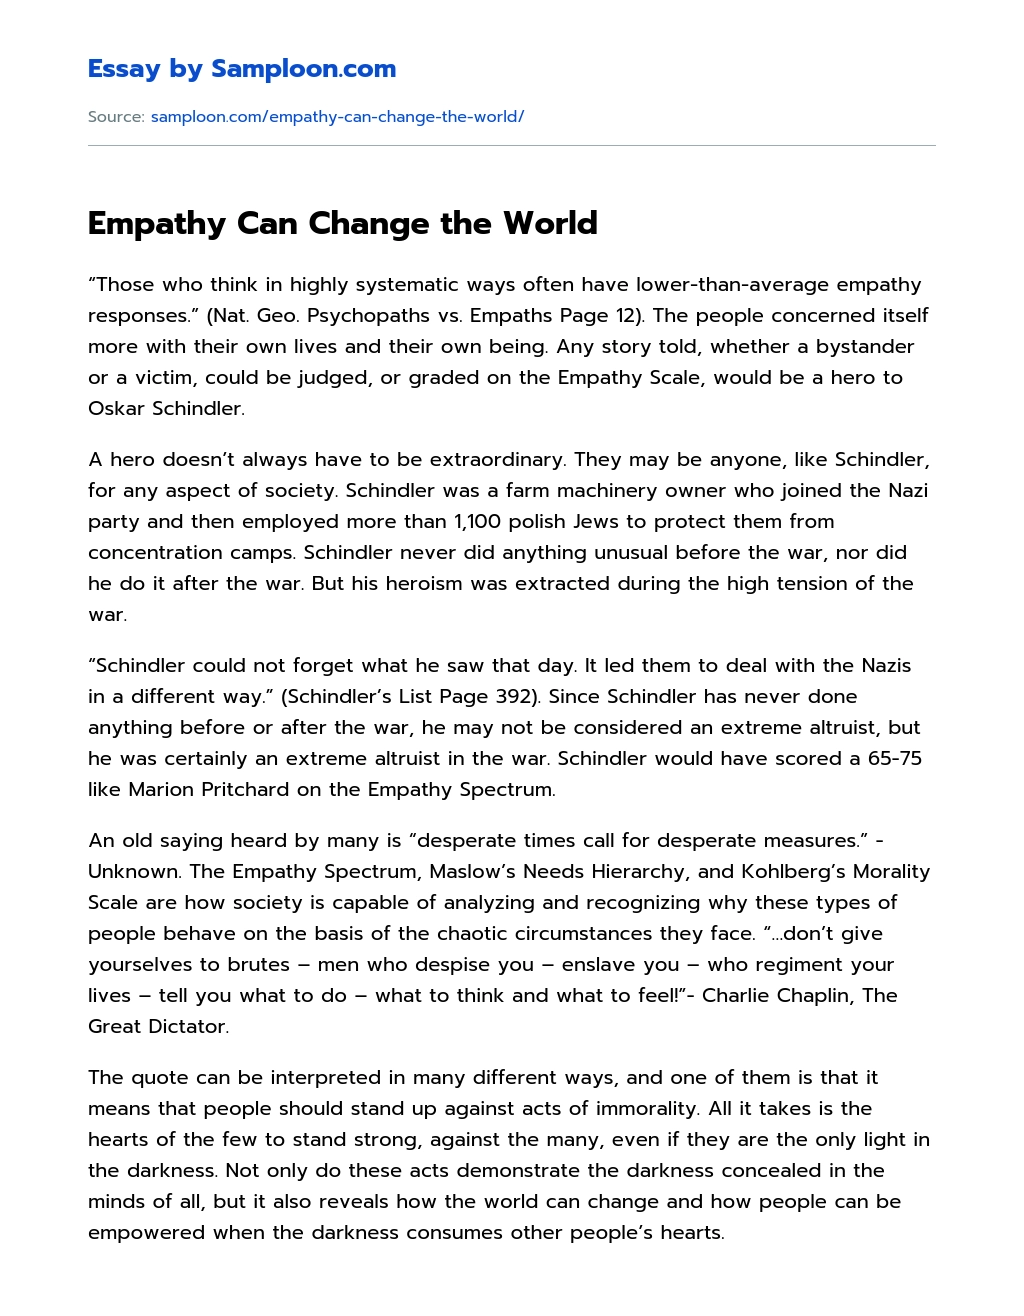 how can you change the world essay